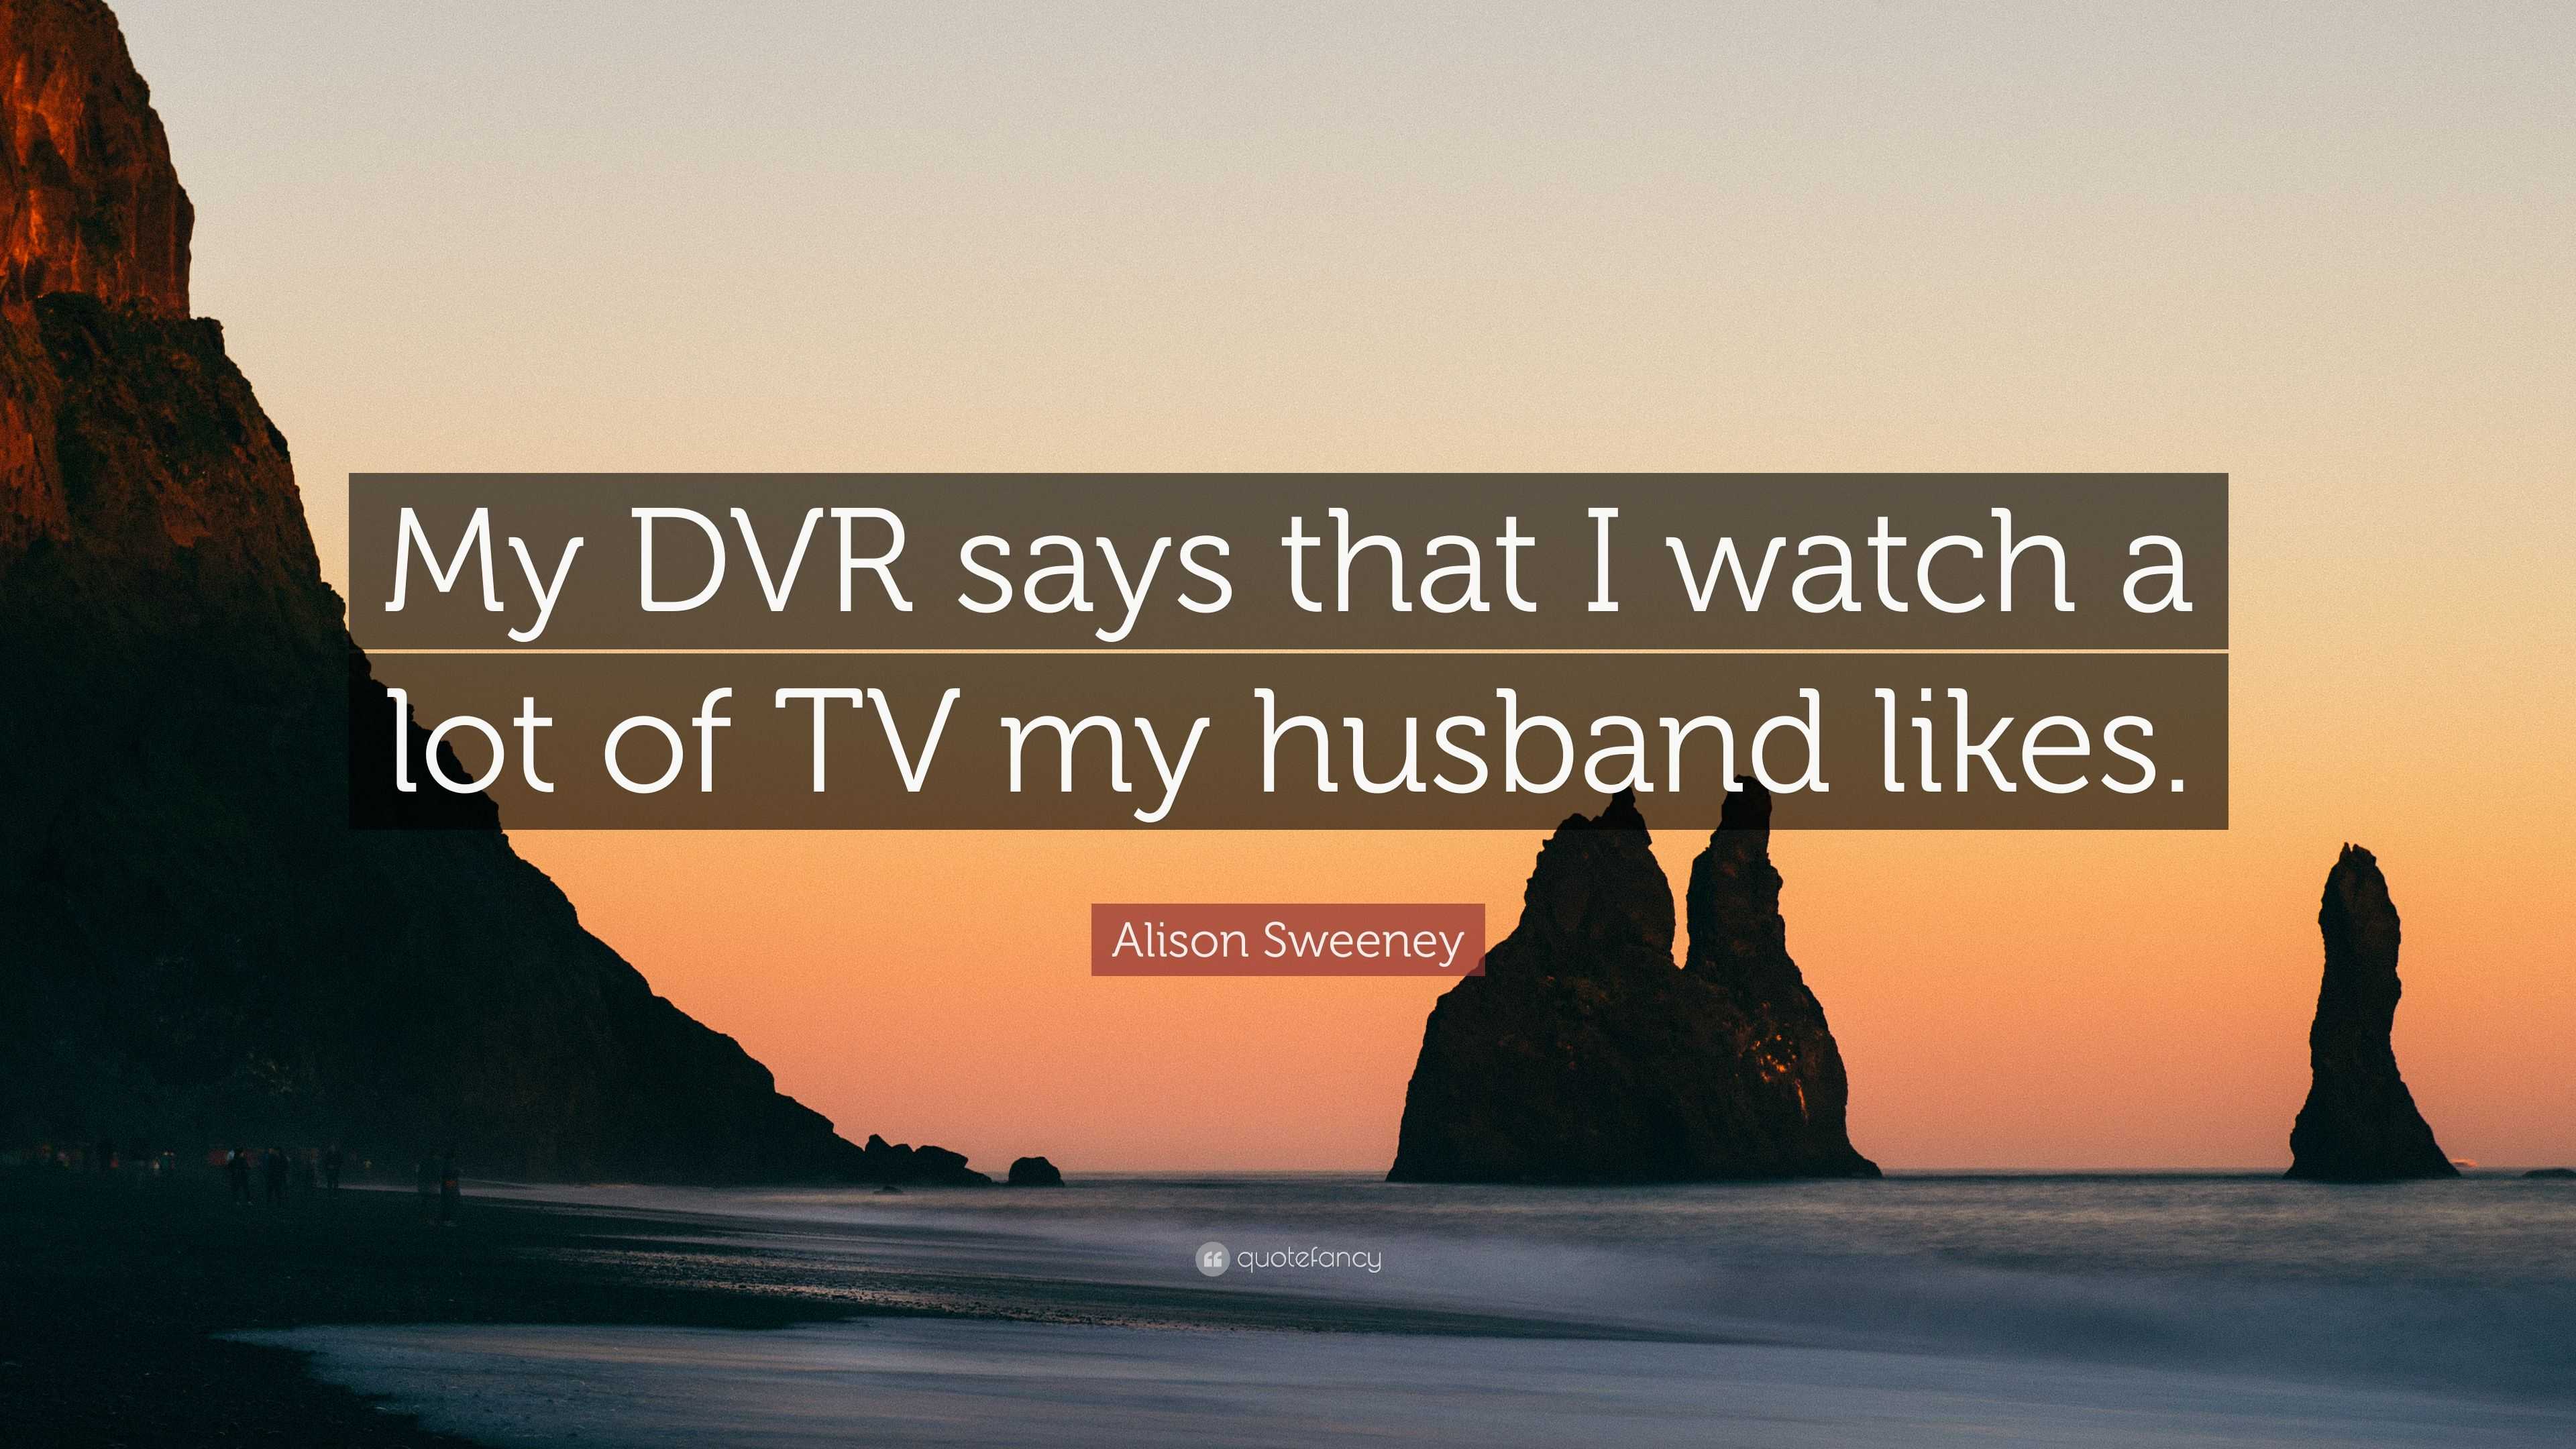 dina bermudez recommends husband loves to watch pic